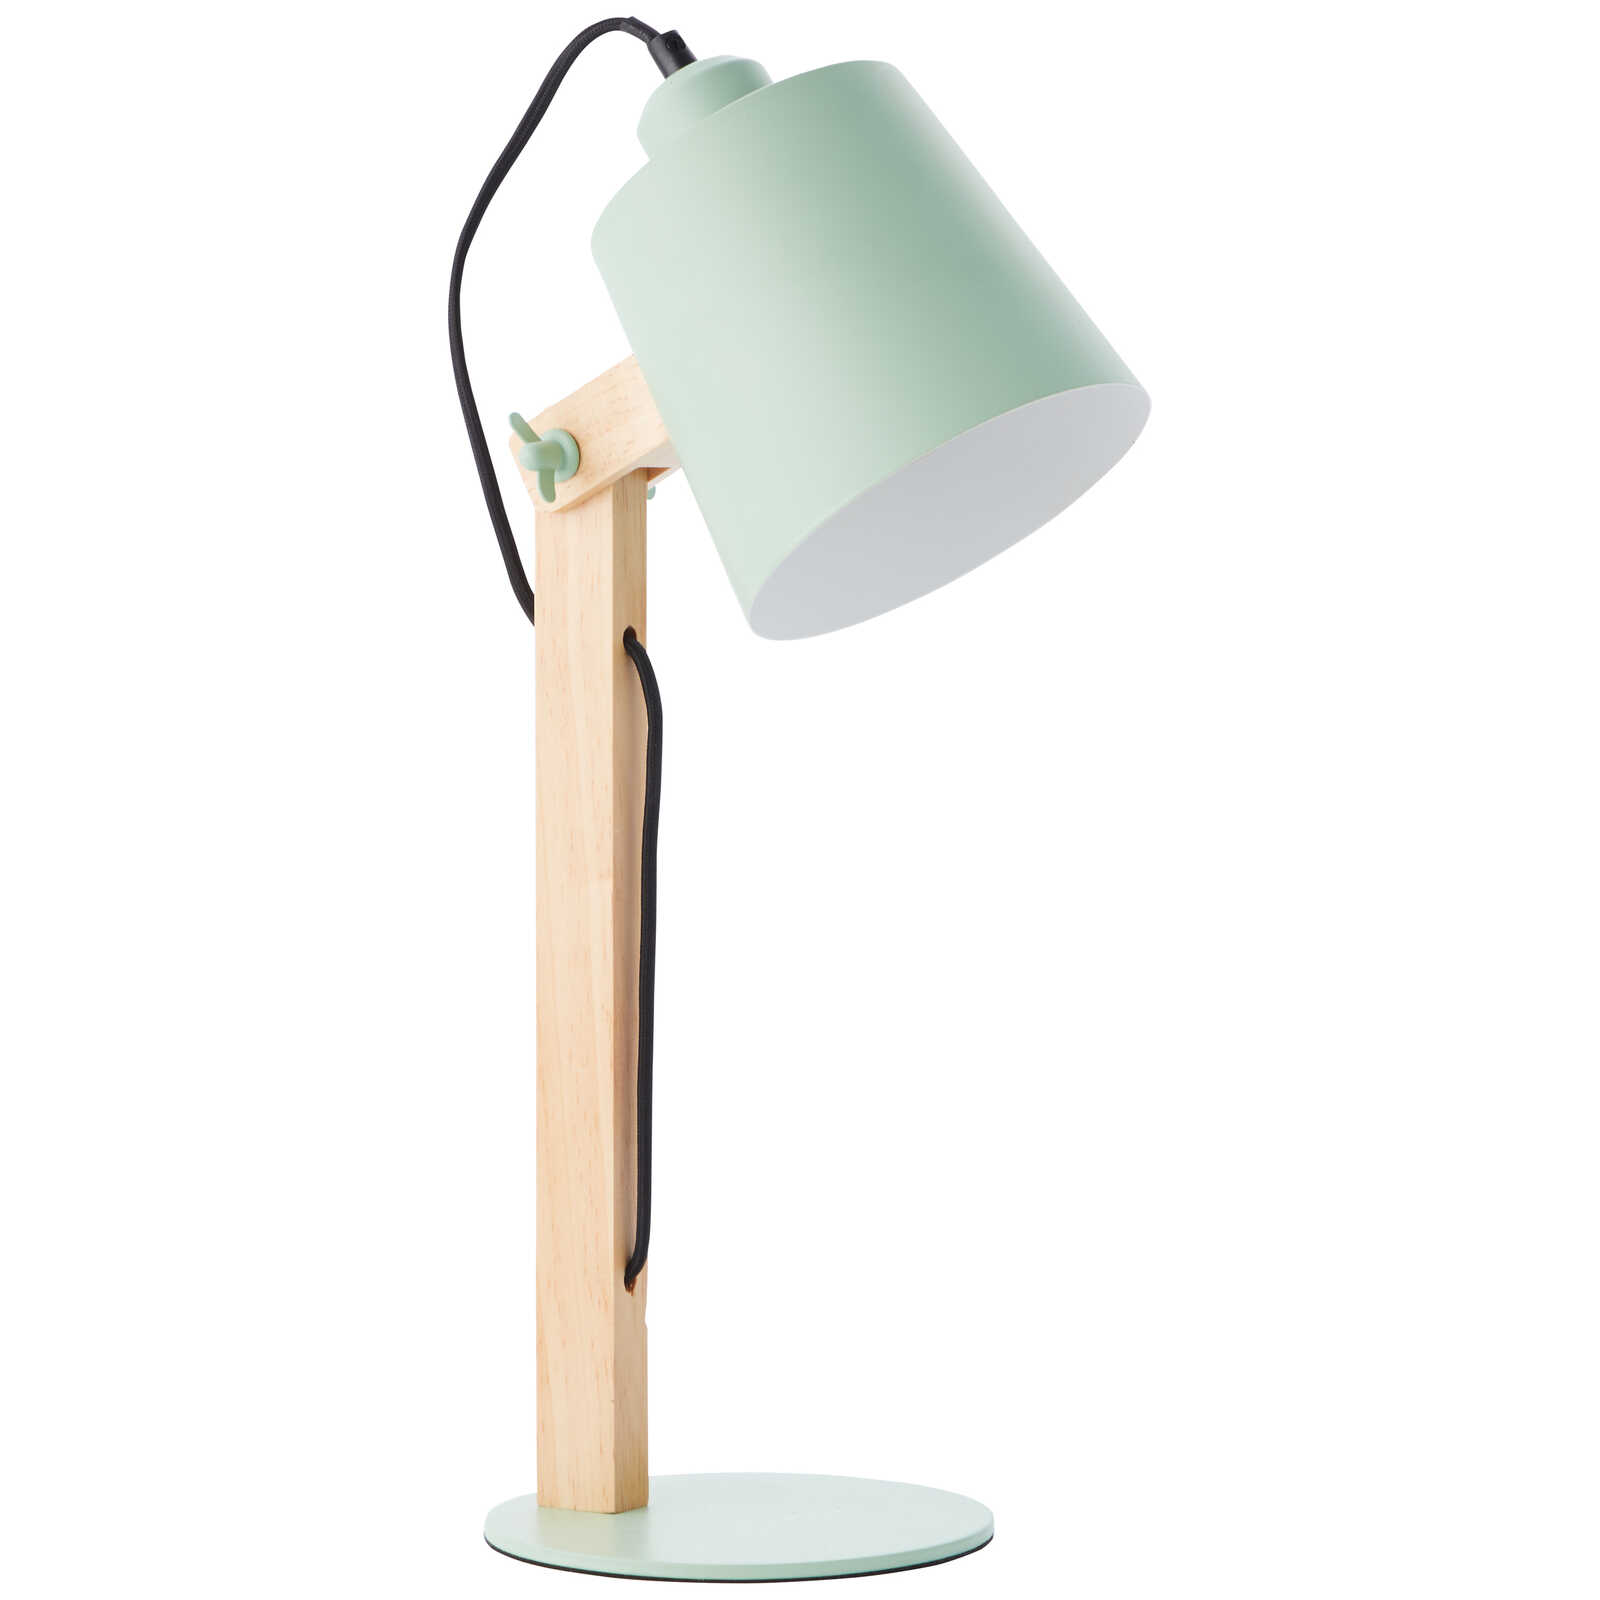             Wooden table lamp - Paul 1 - Green
        